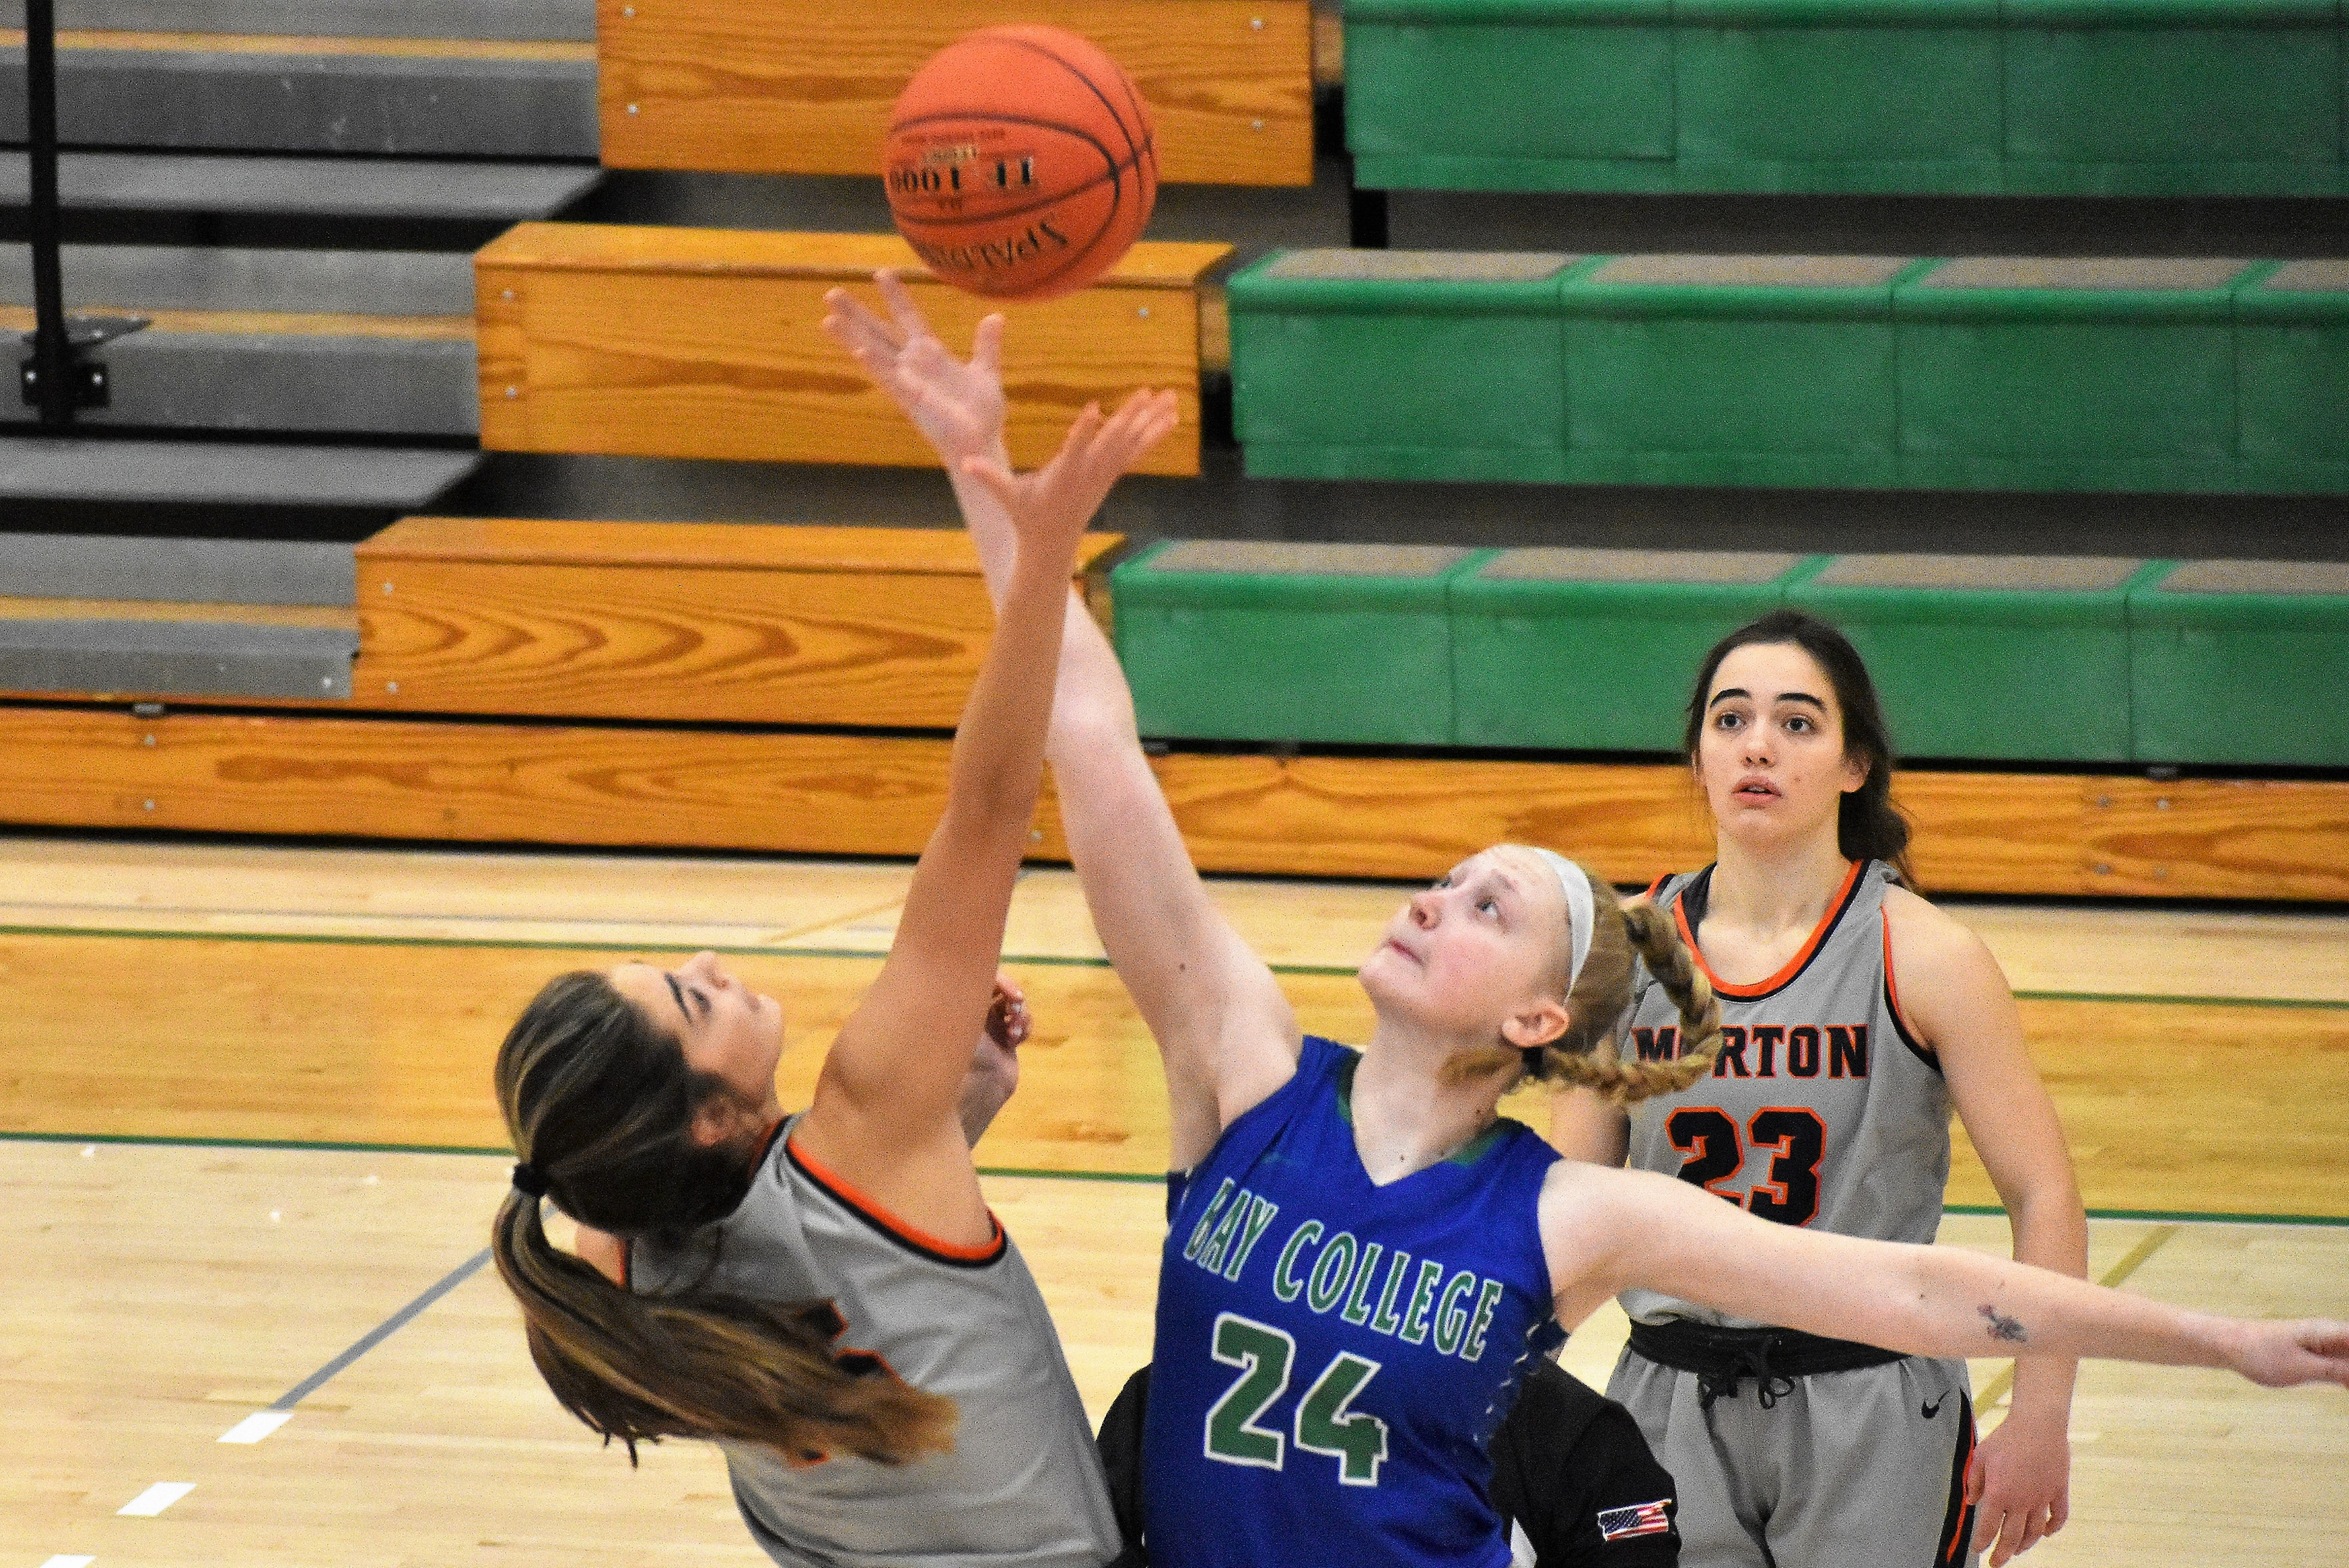 Madison Olsen reaches for the opening tip against a Morton player